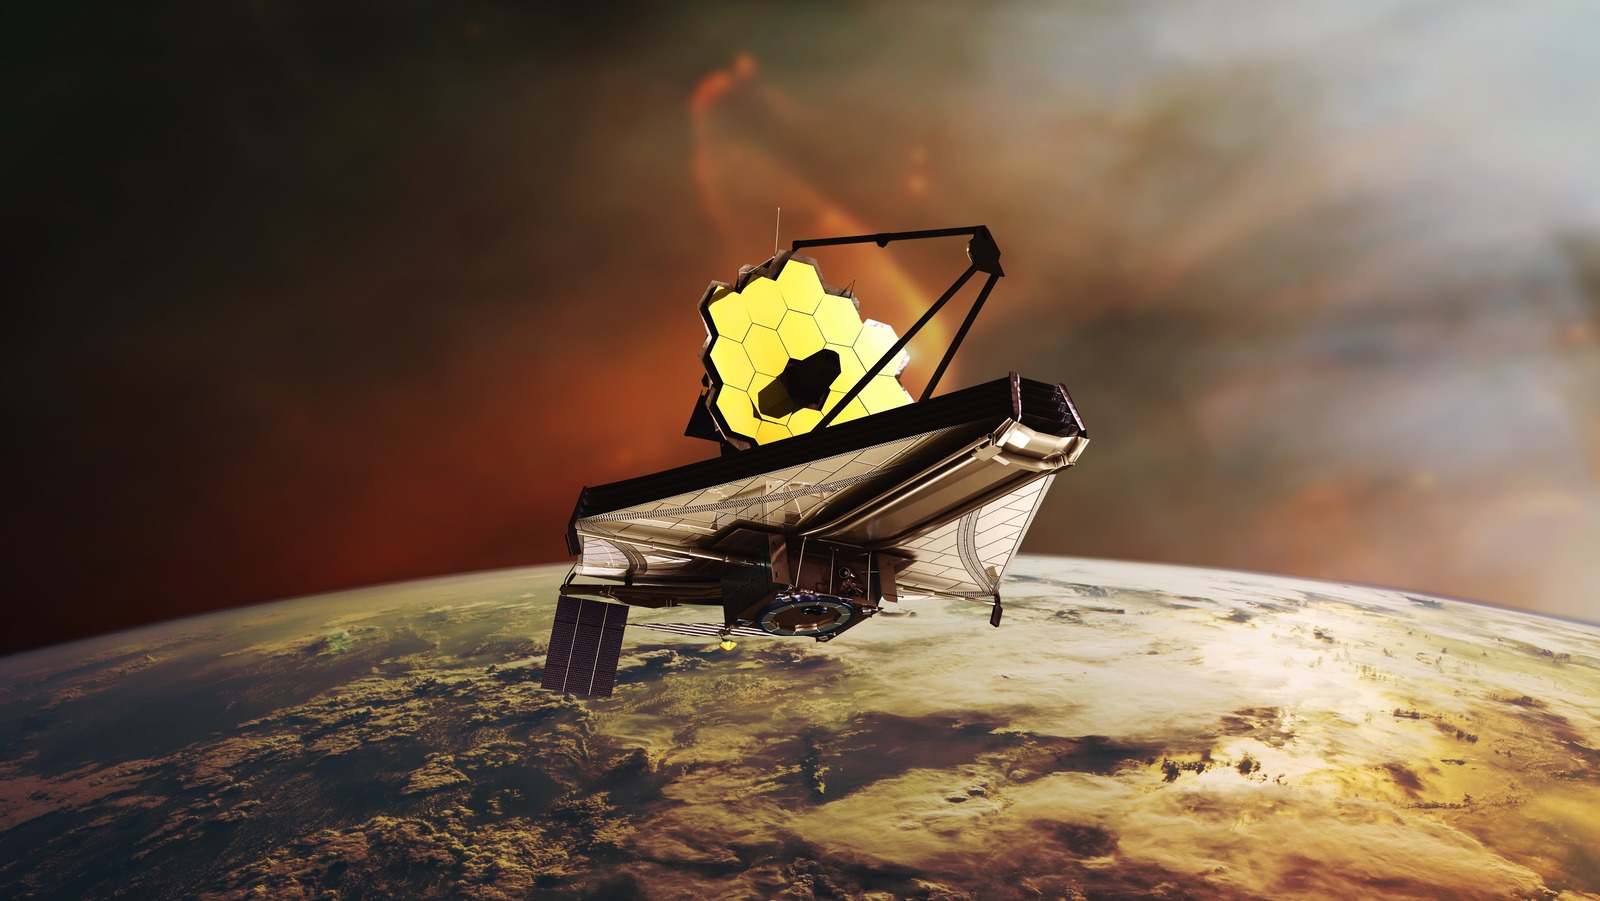 James Webb Space Telescope’s Massive Images Are Stored On A Tiny SSD